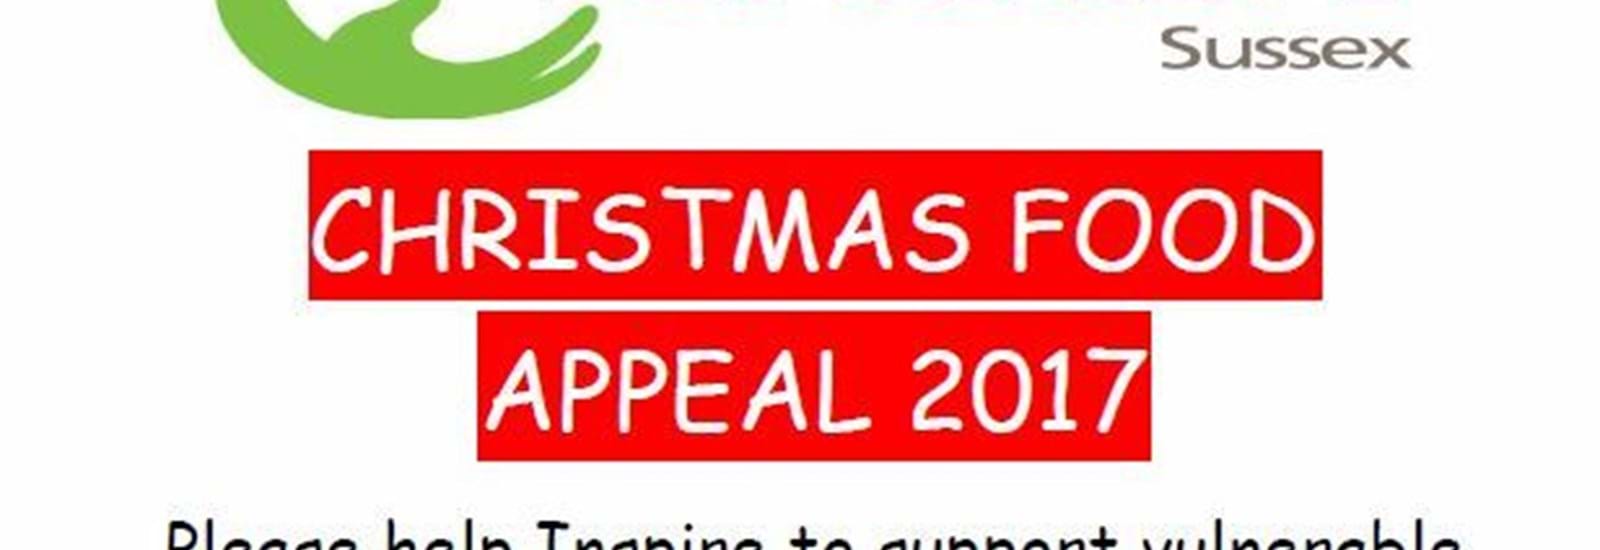 Banner for Christmas Food Appeal 2017